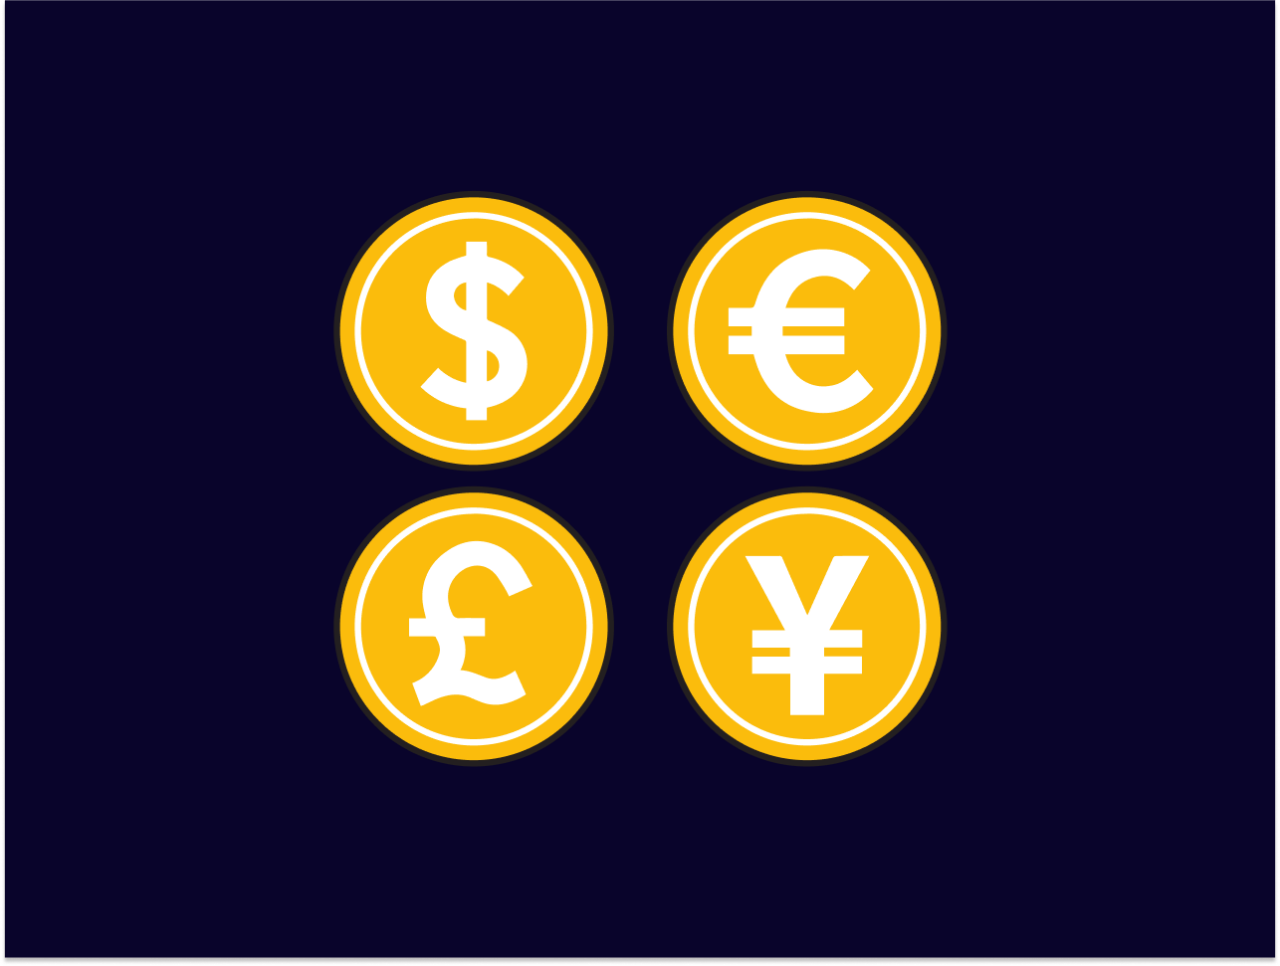 Different currency symbols